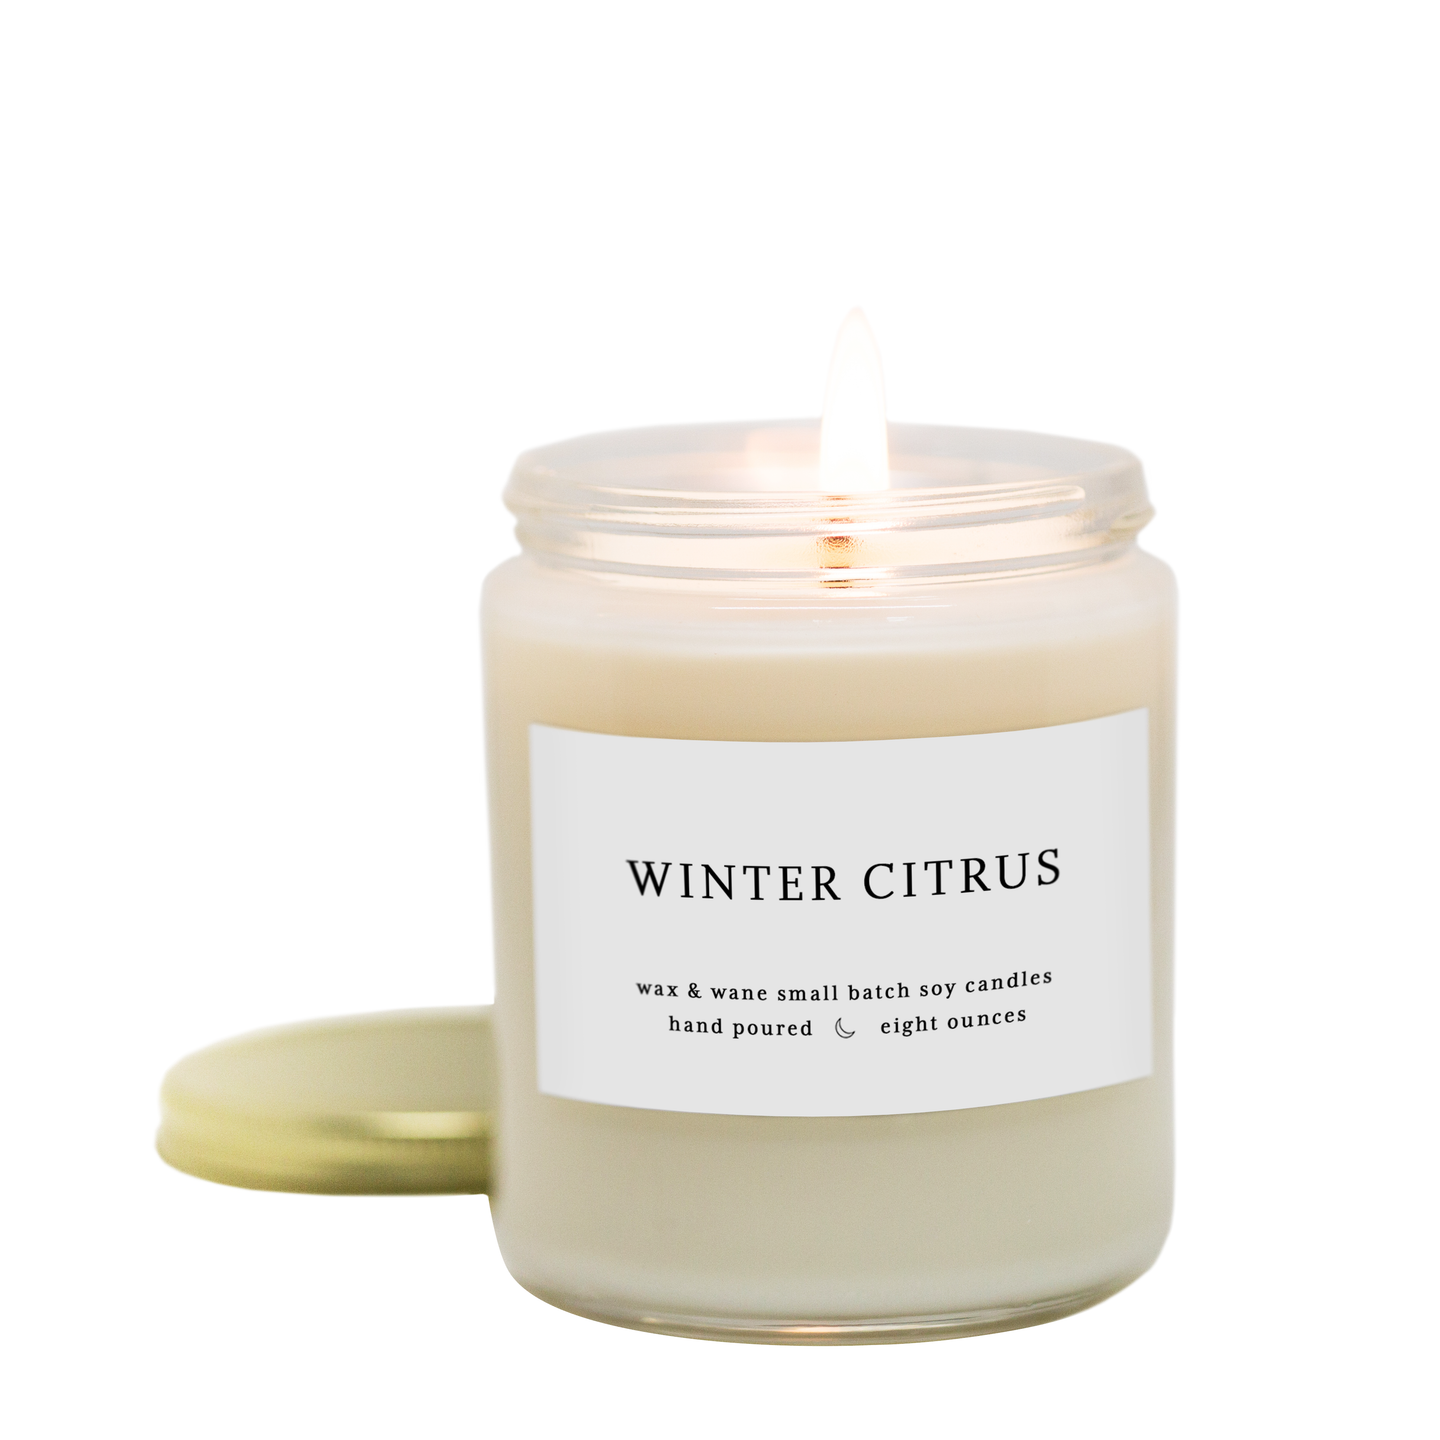 Winter Citrus Modern Soy Candle